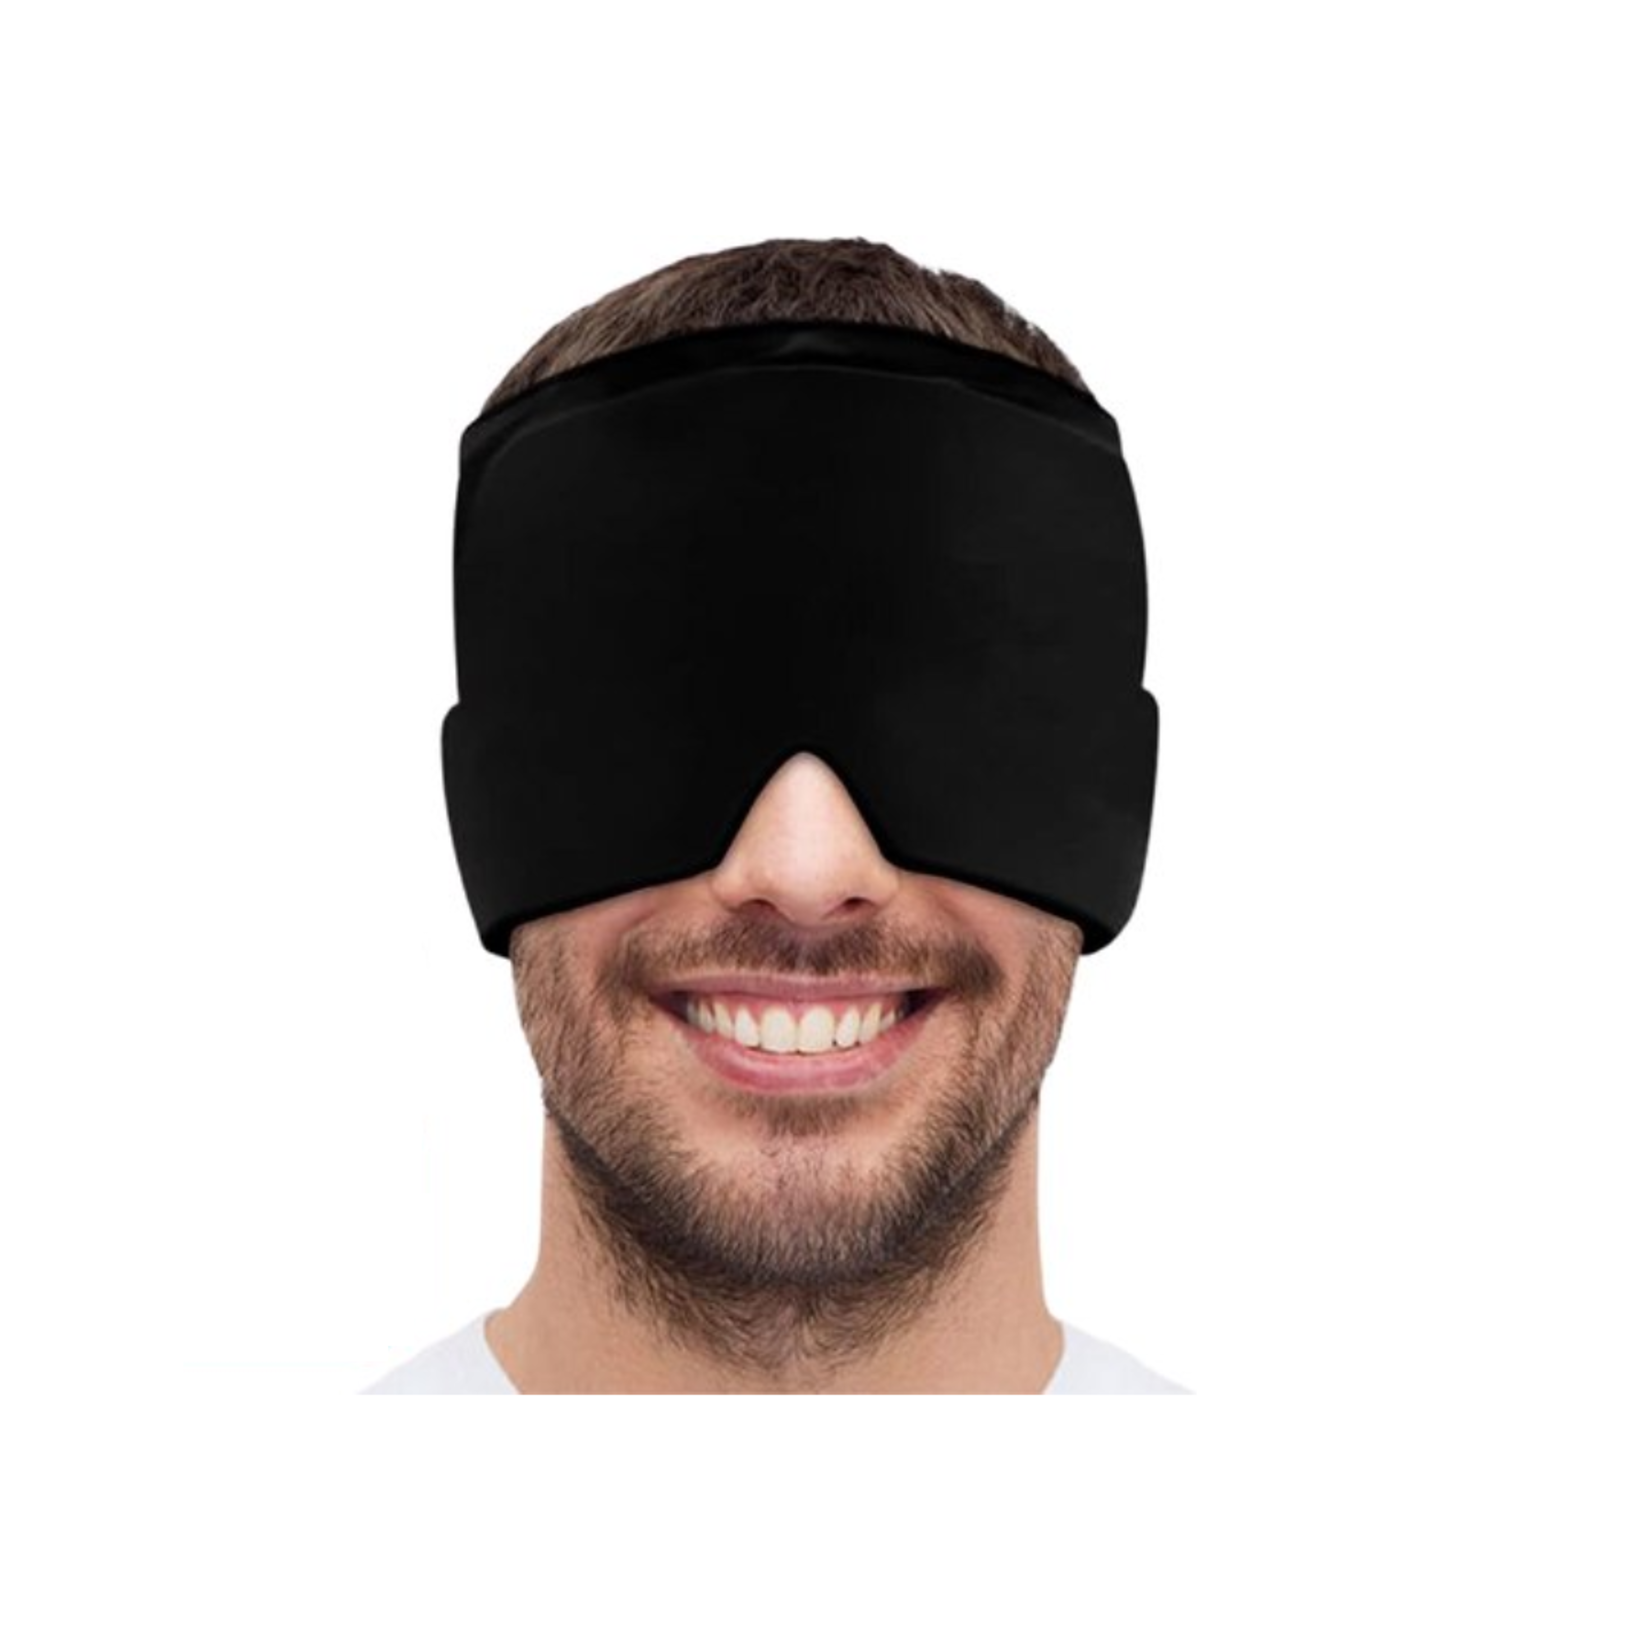 MHZ Migraine mask - Icepack - Heat and cold therapy - Black